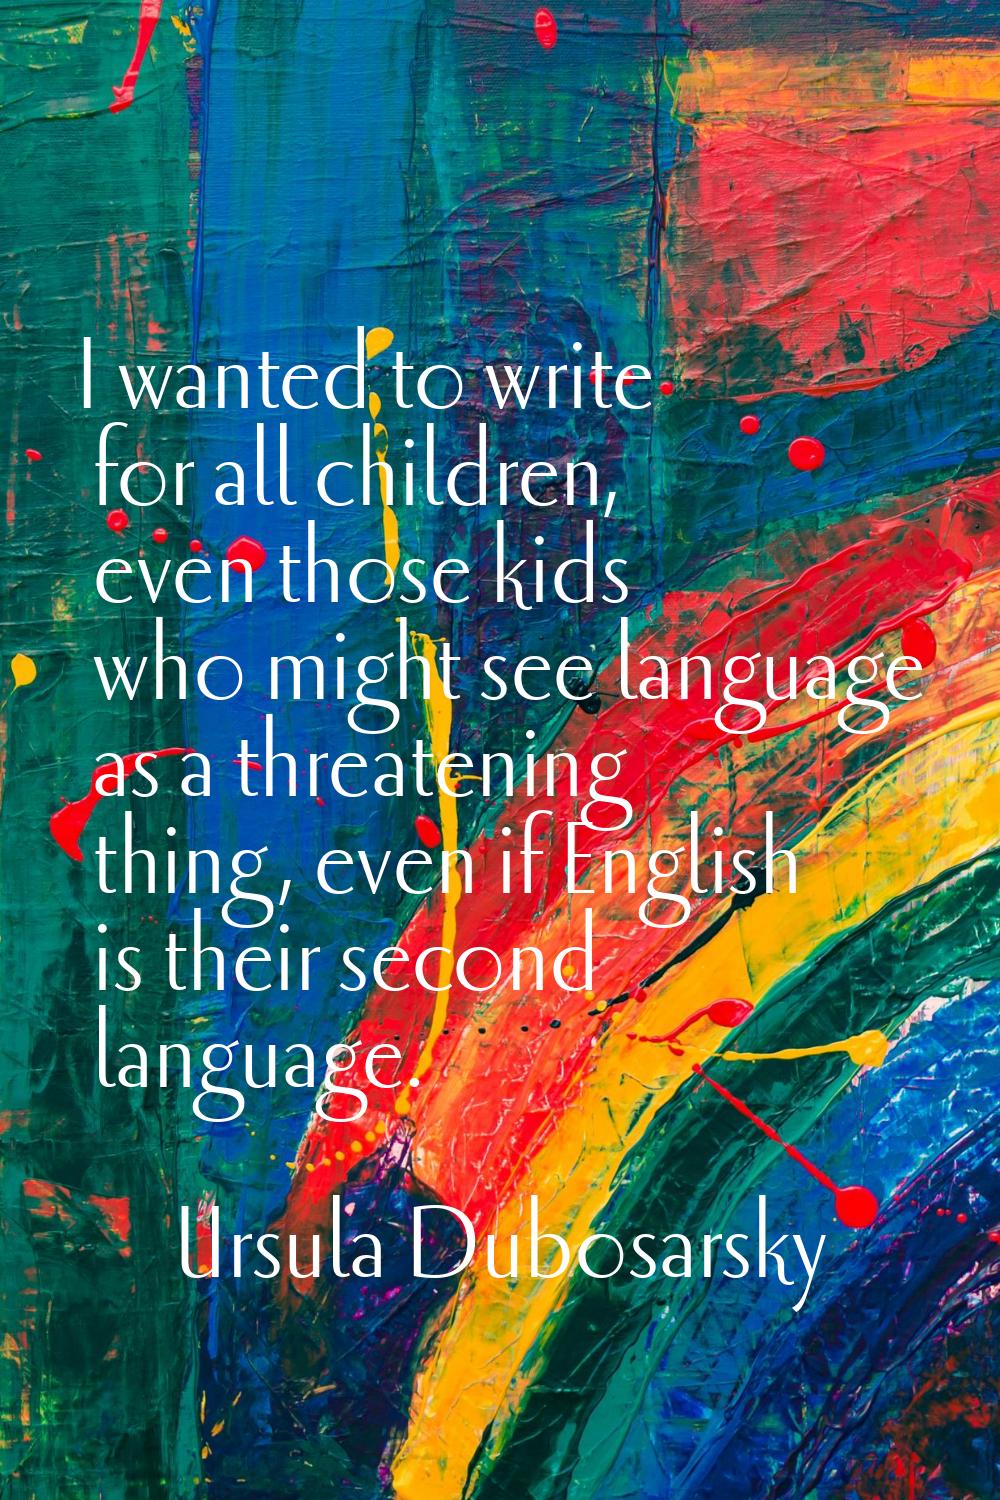 I wanted to write for all children, even those kids who might see language as a threatening thing, 